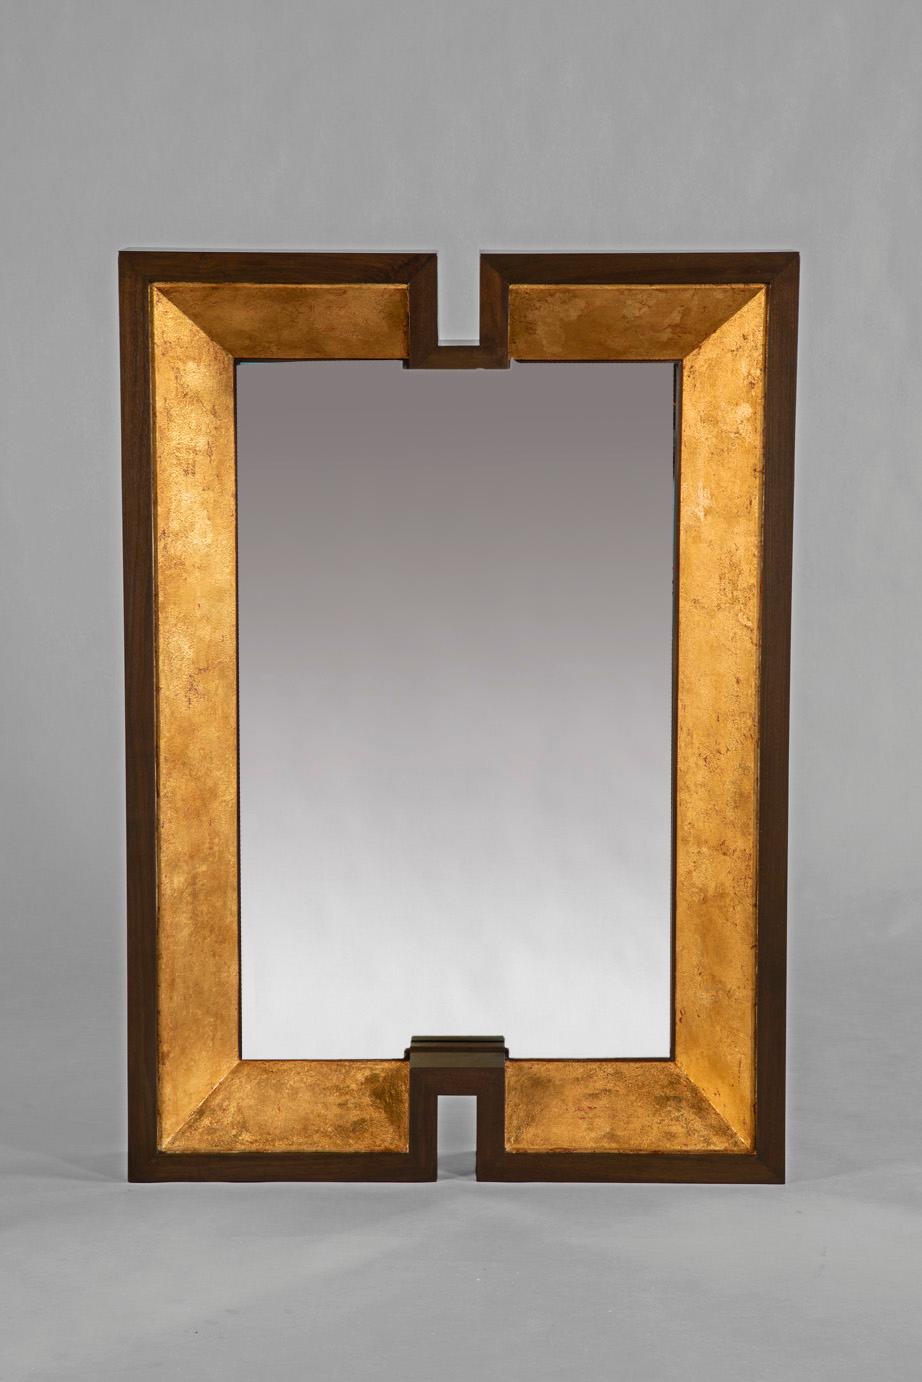 Solid walnut frame, the angled inside finished in burnished gold.
Custom sizes, finishes, materials available.
 